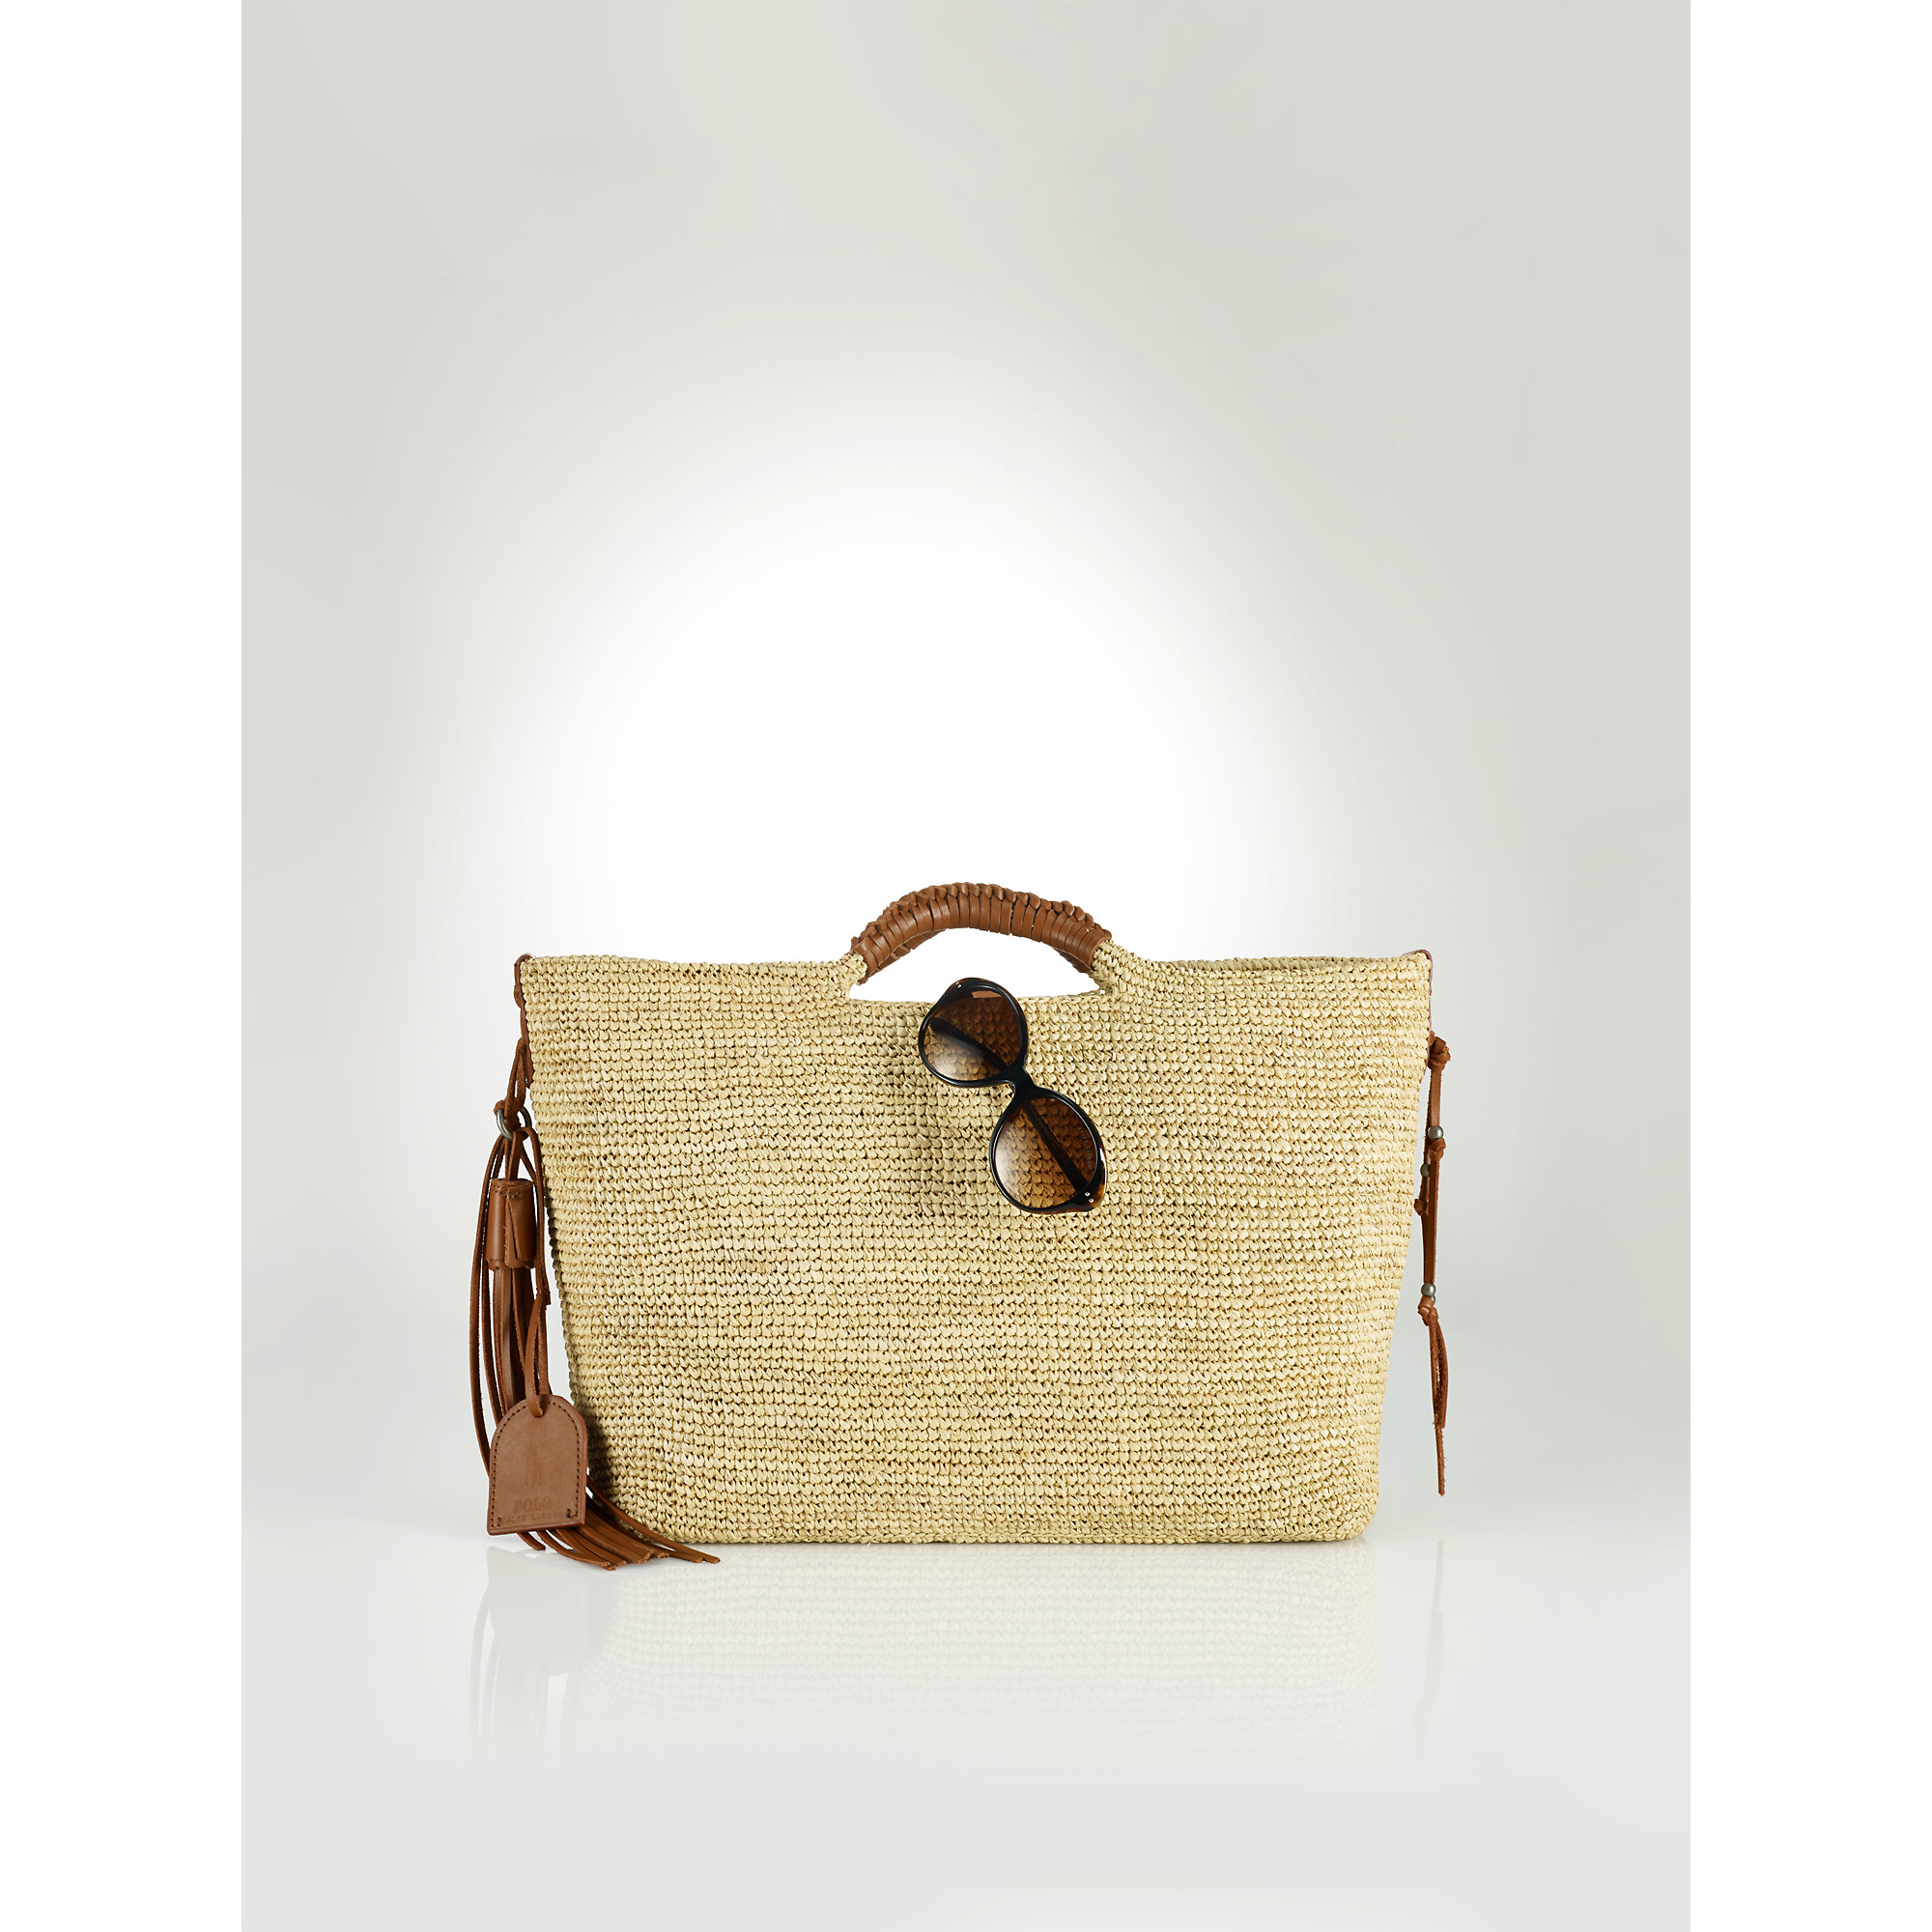 Polo Ralph Lauren Leather Woven Raffia Tote in Natural - Lyst